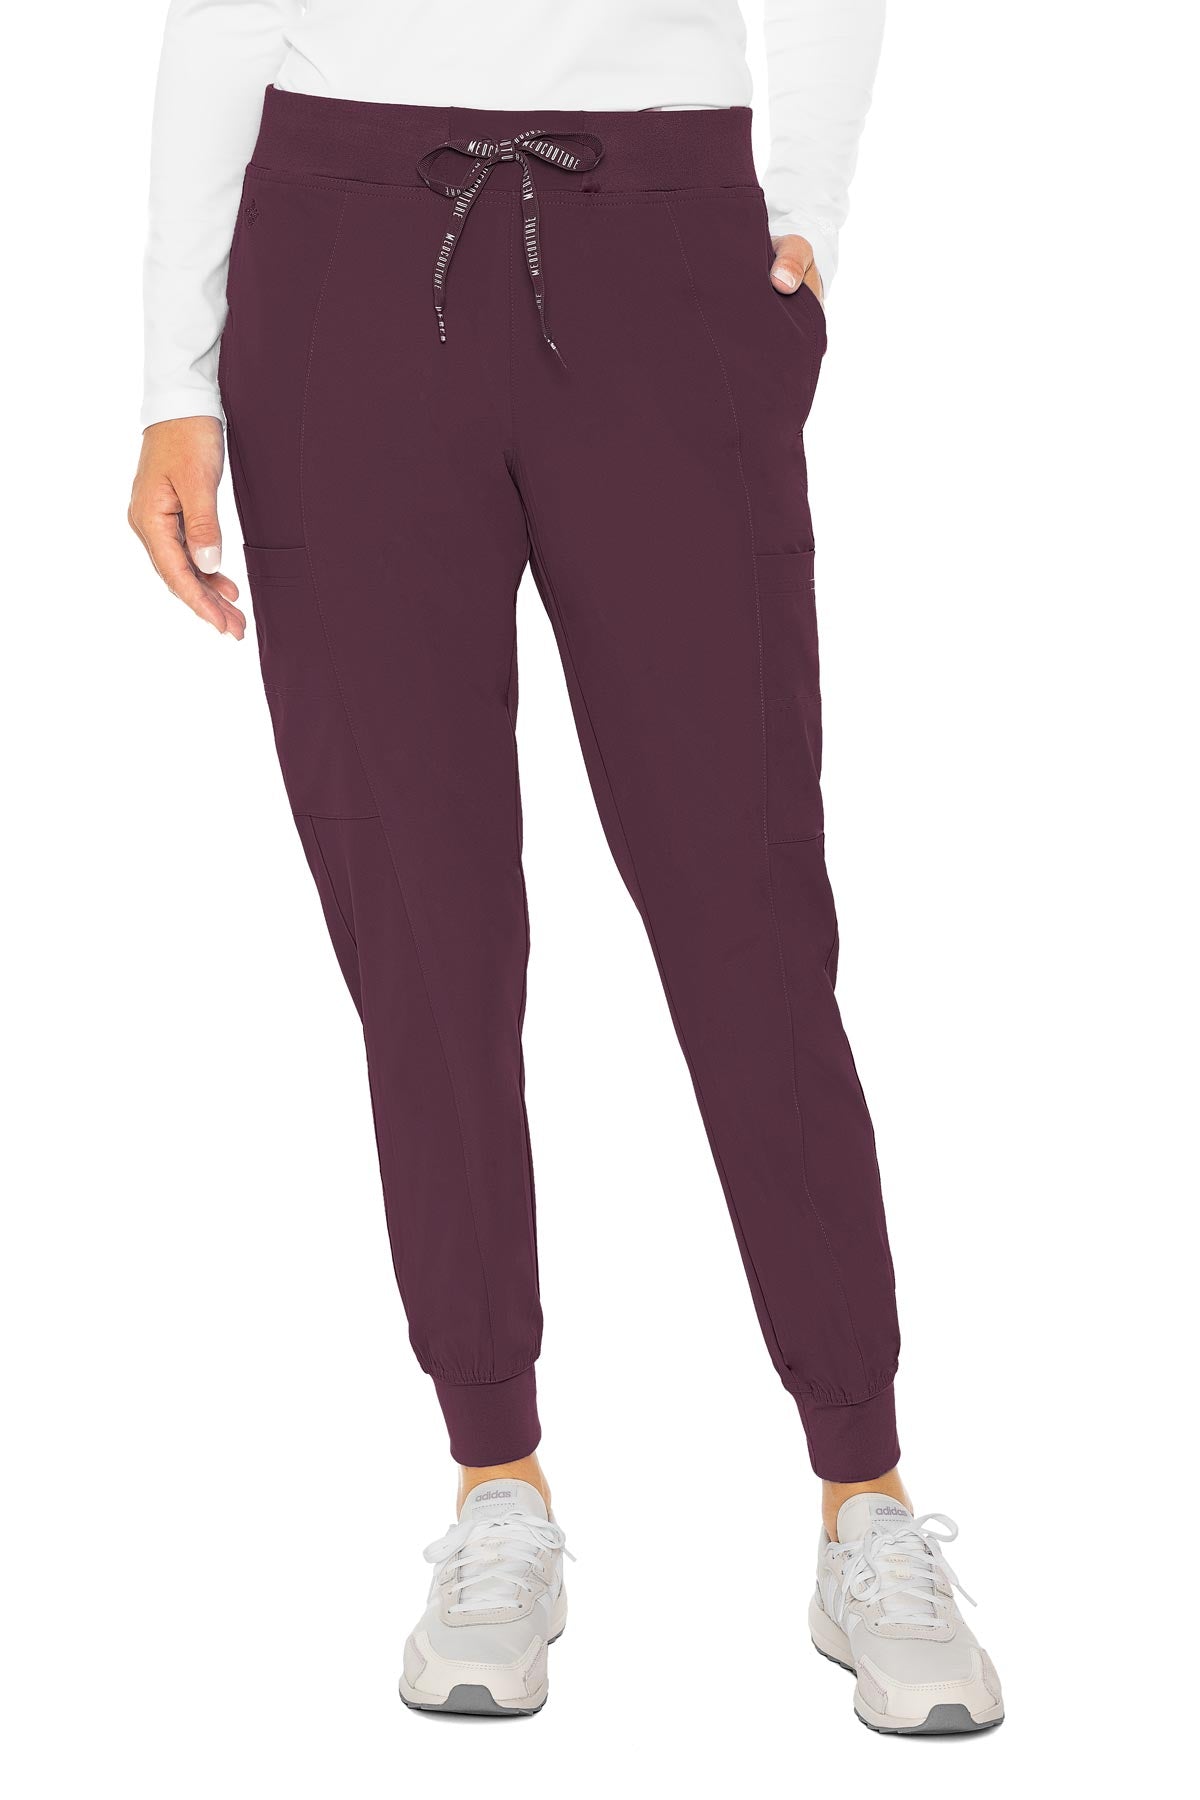 Med Couture Peaches Seamed Jogger Tall Length (XS-XL) – Berani Femme  Couture Scrubwear & Medical Supply